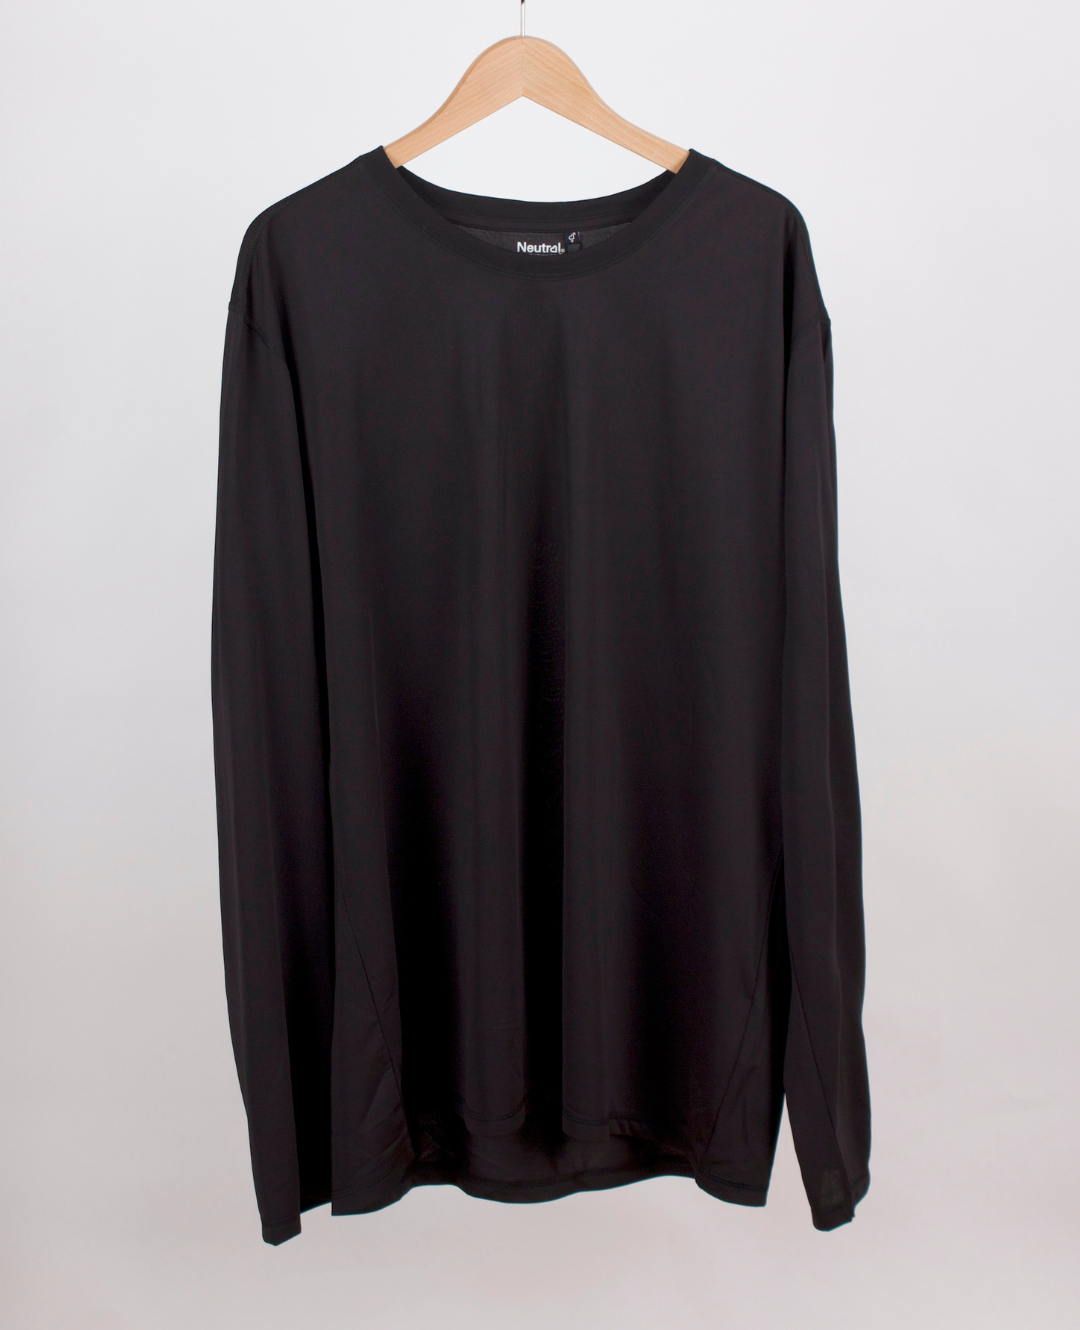 Neutral Recycled Performance Long Sleeve